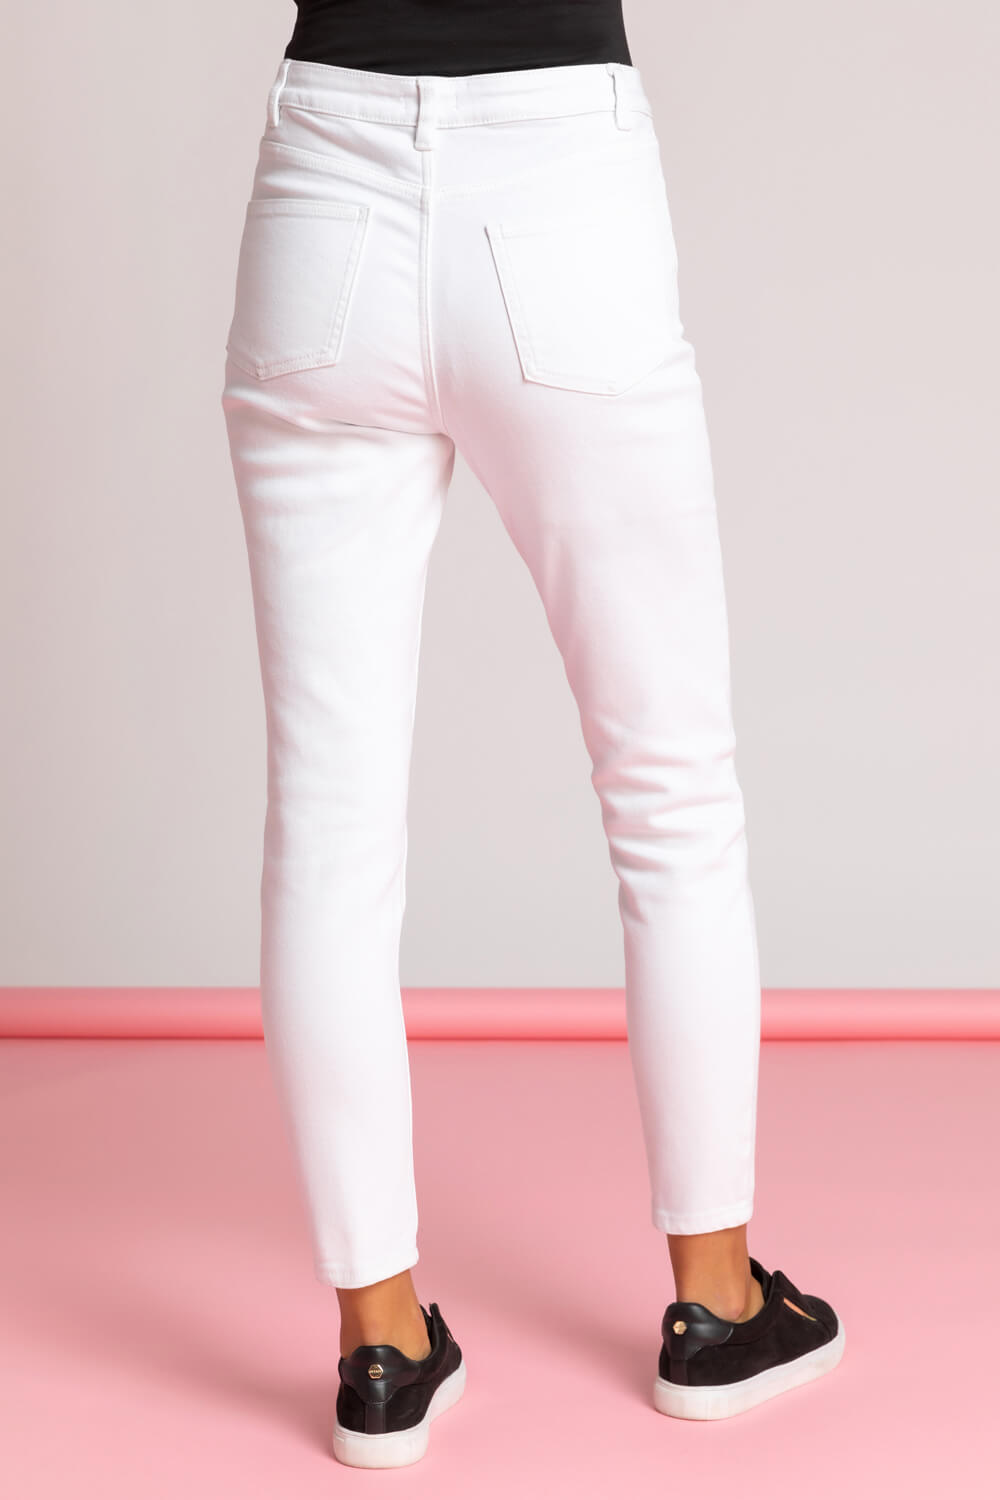 White Ripped Stretch Skinny Jeans, Image 2 of 4